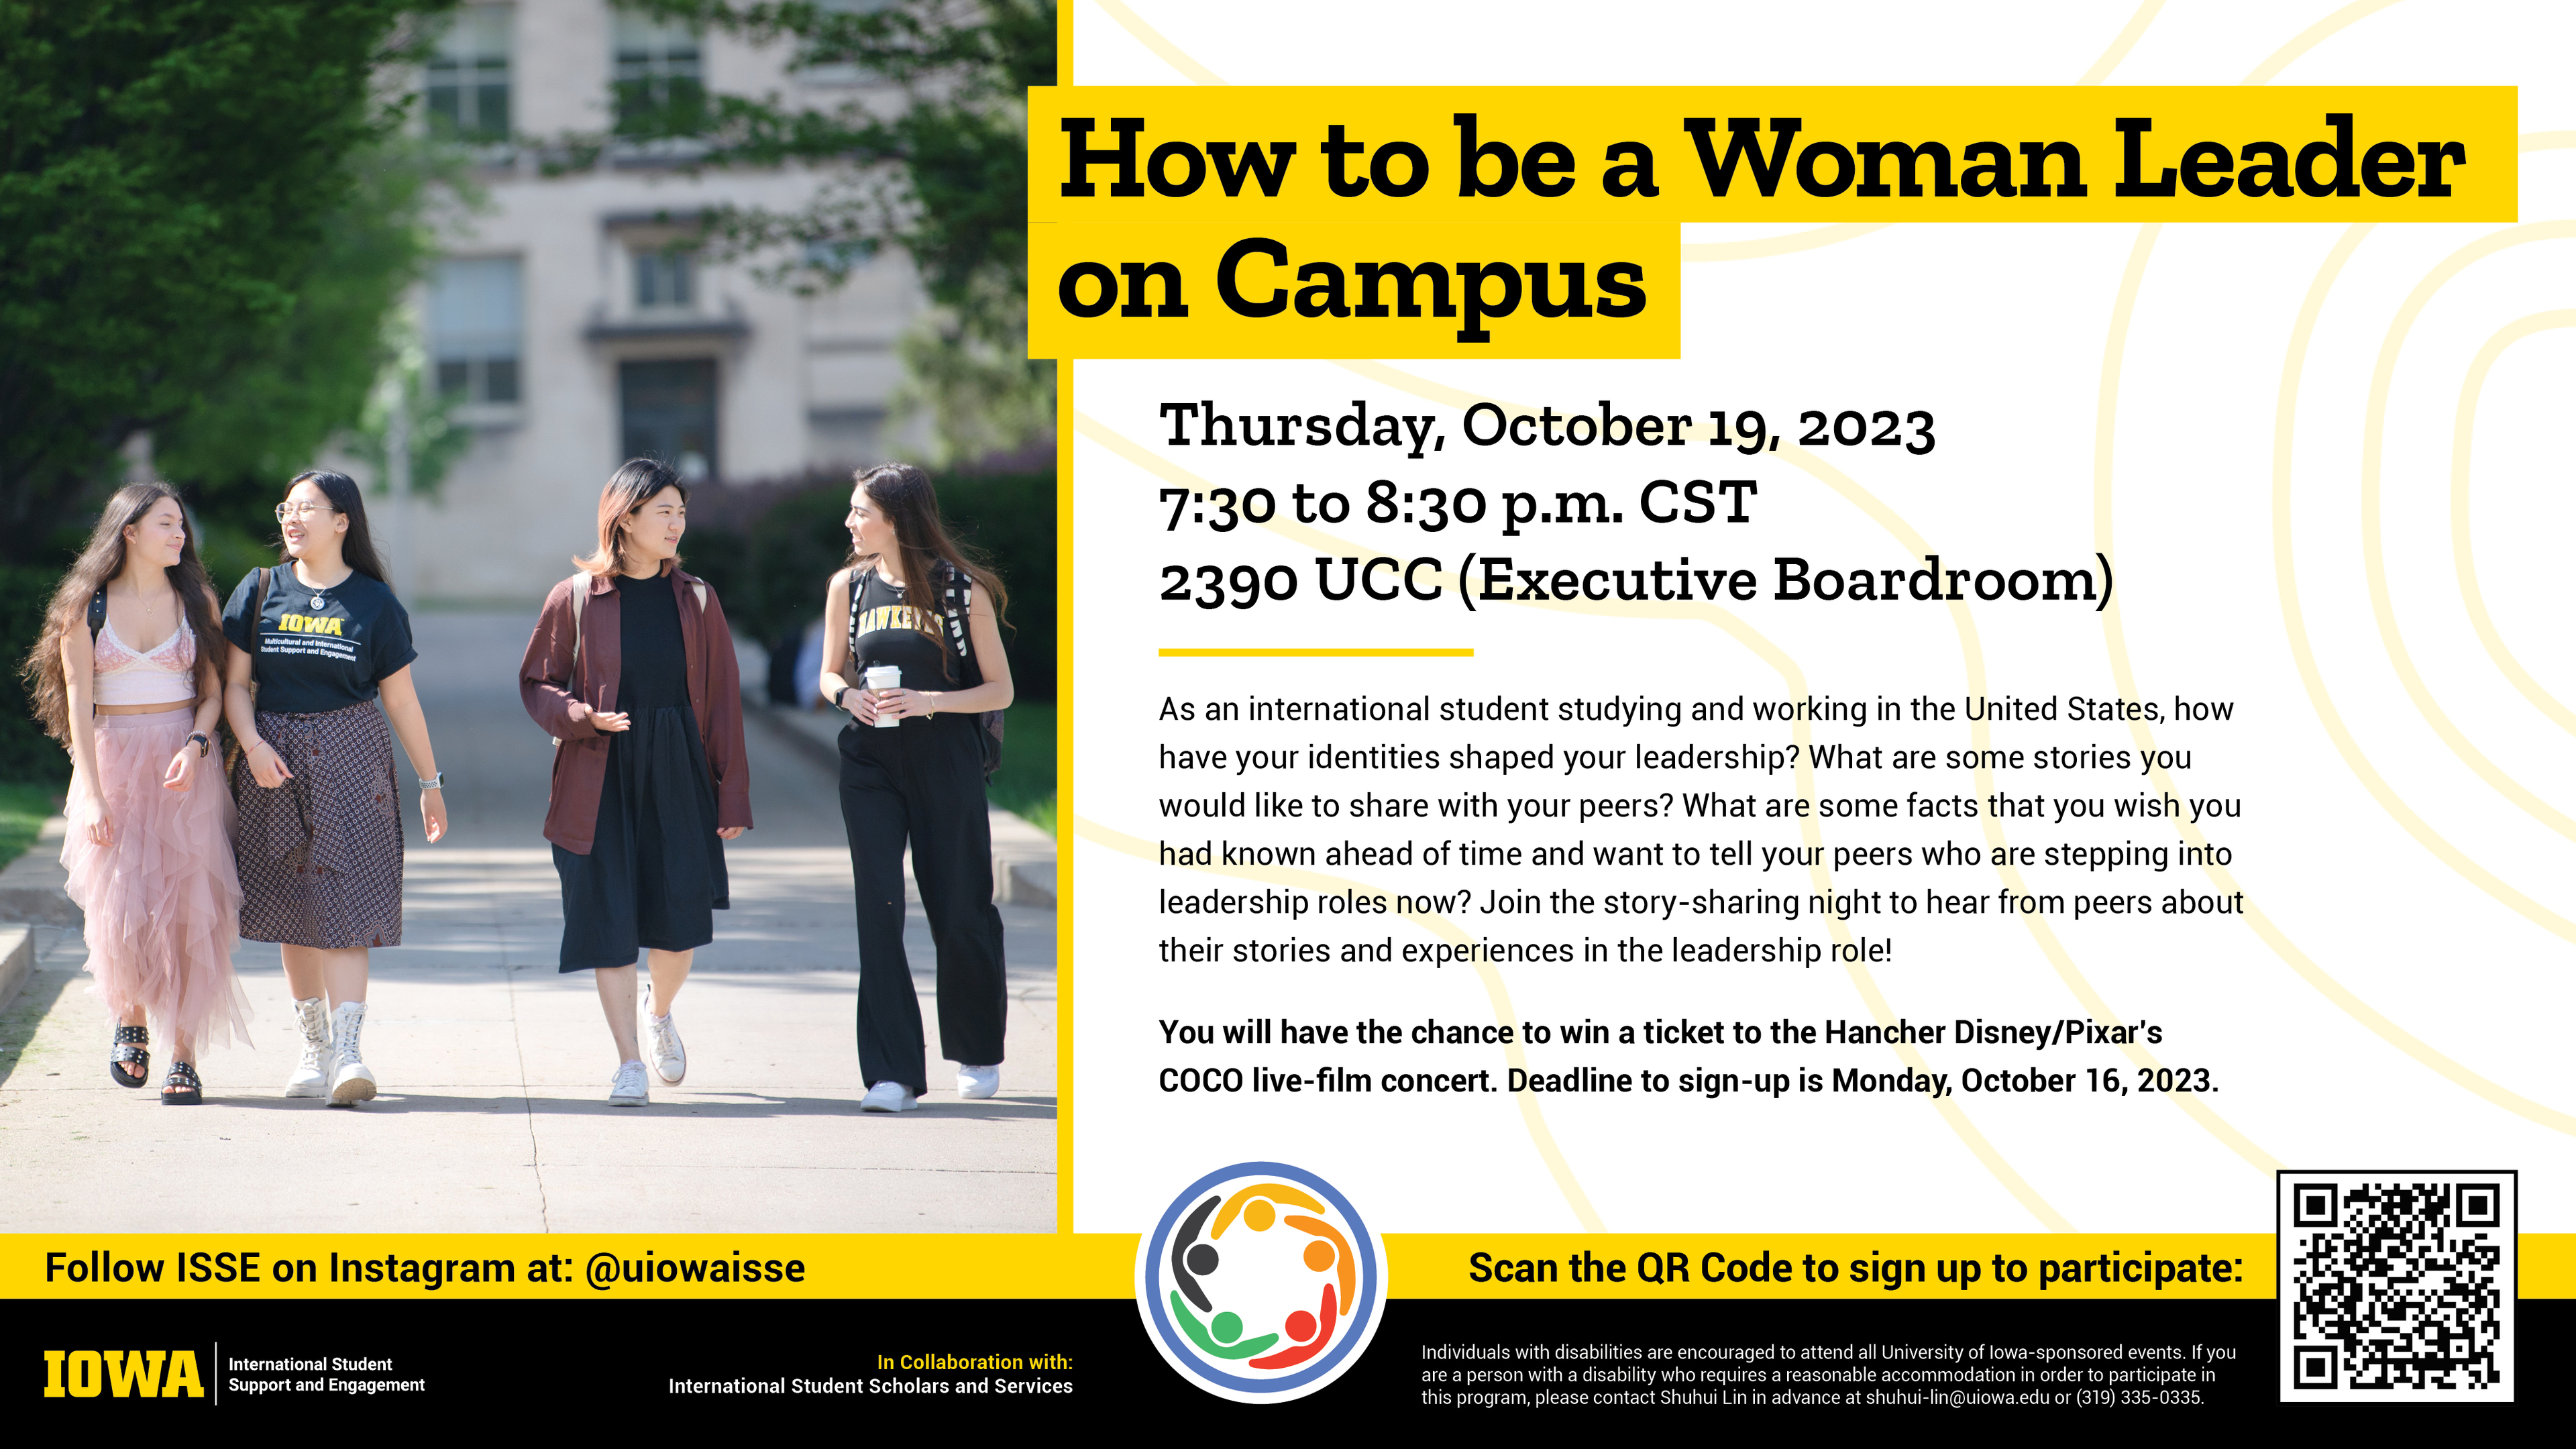 How to be a woman leader on campus